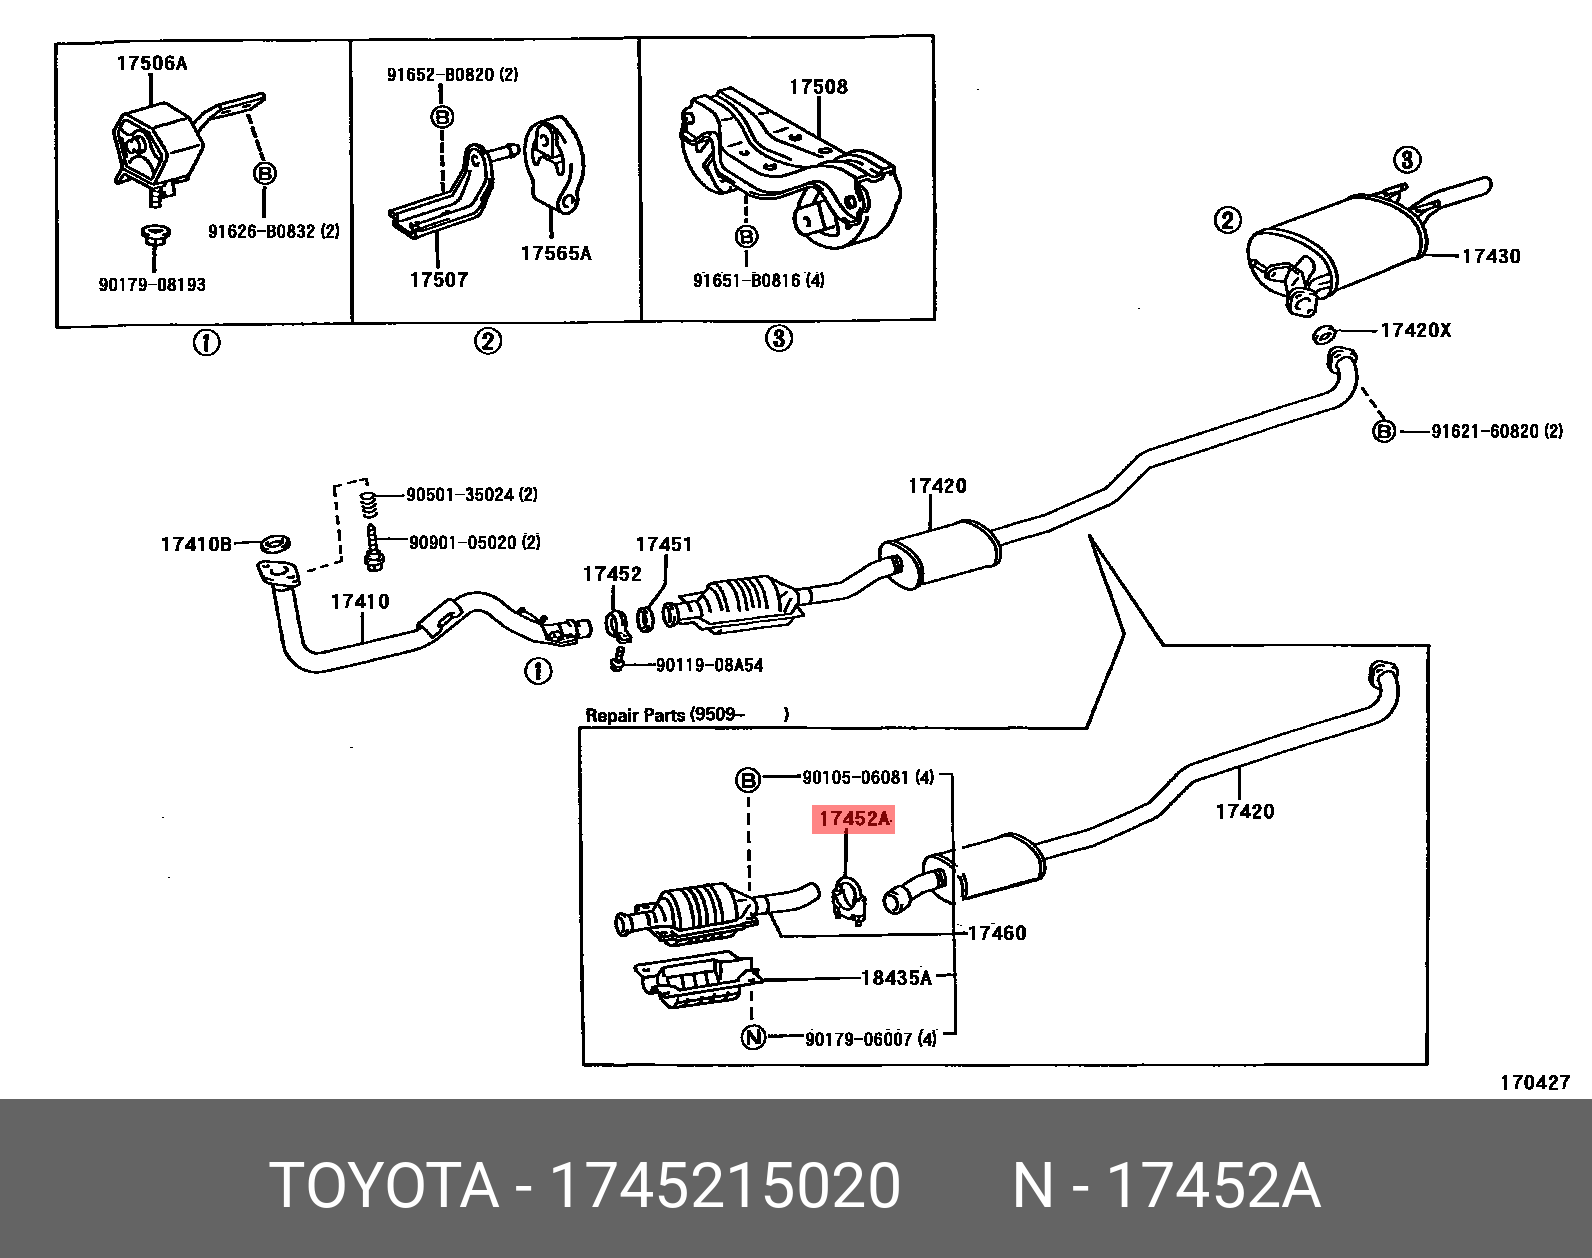 SPRINTER 199505 - 200008, CLAMP, EXHAUST PIPE